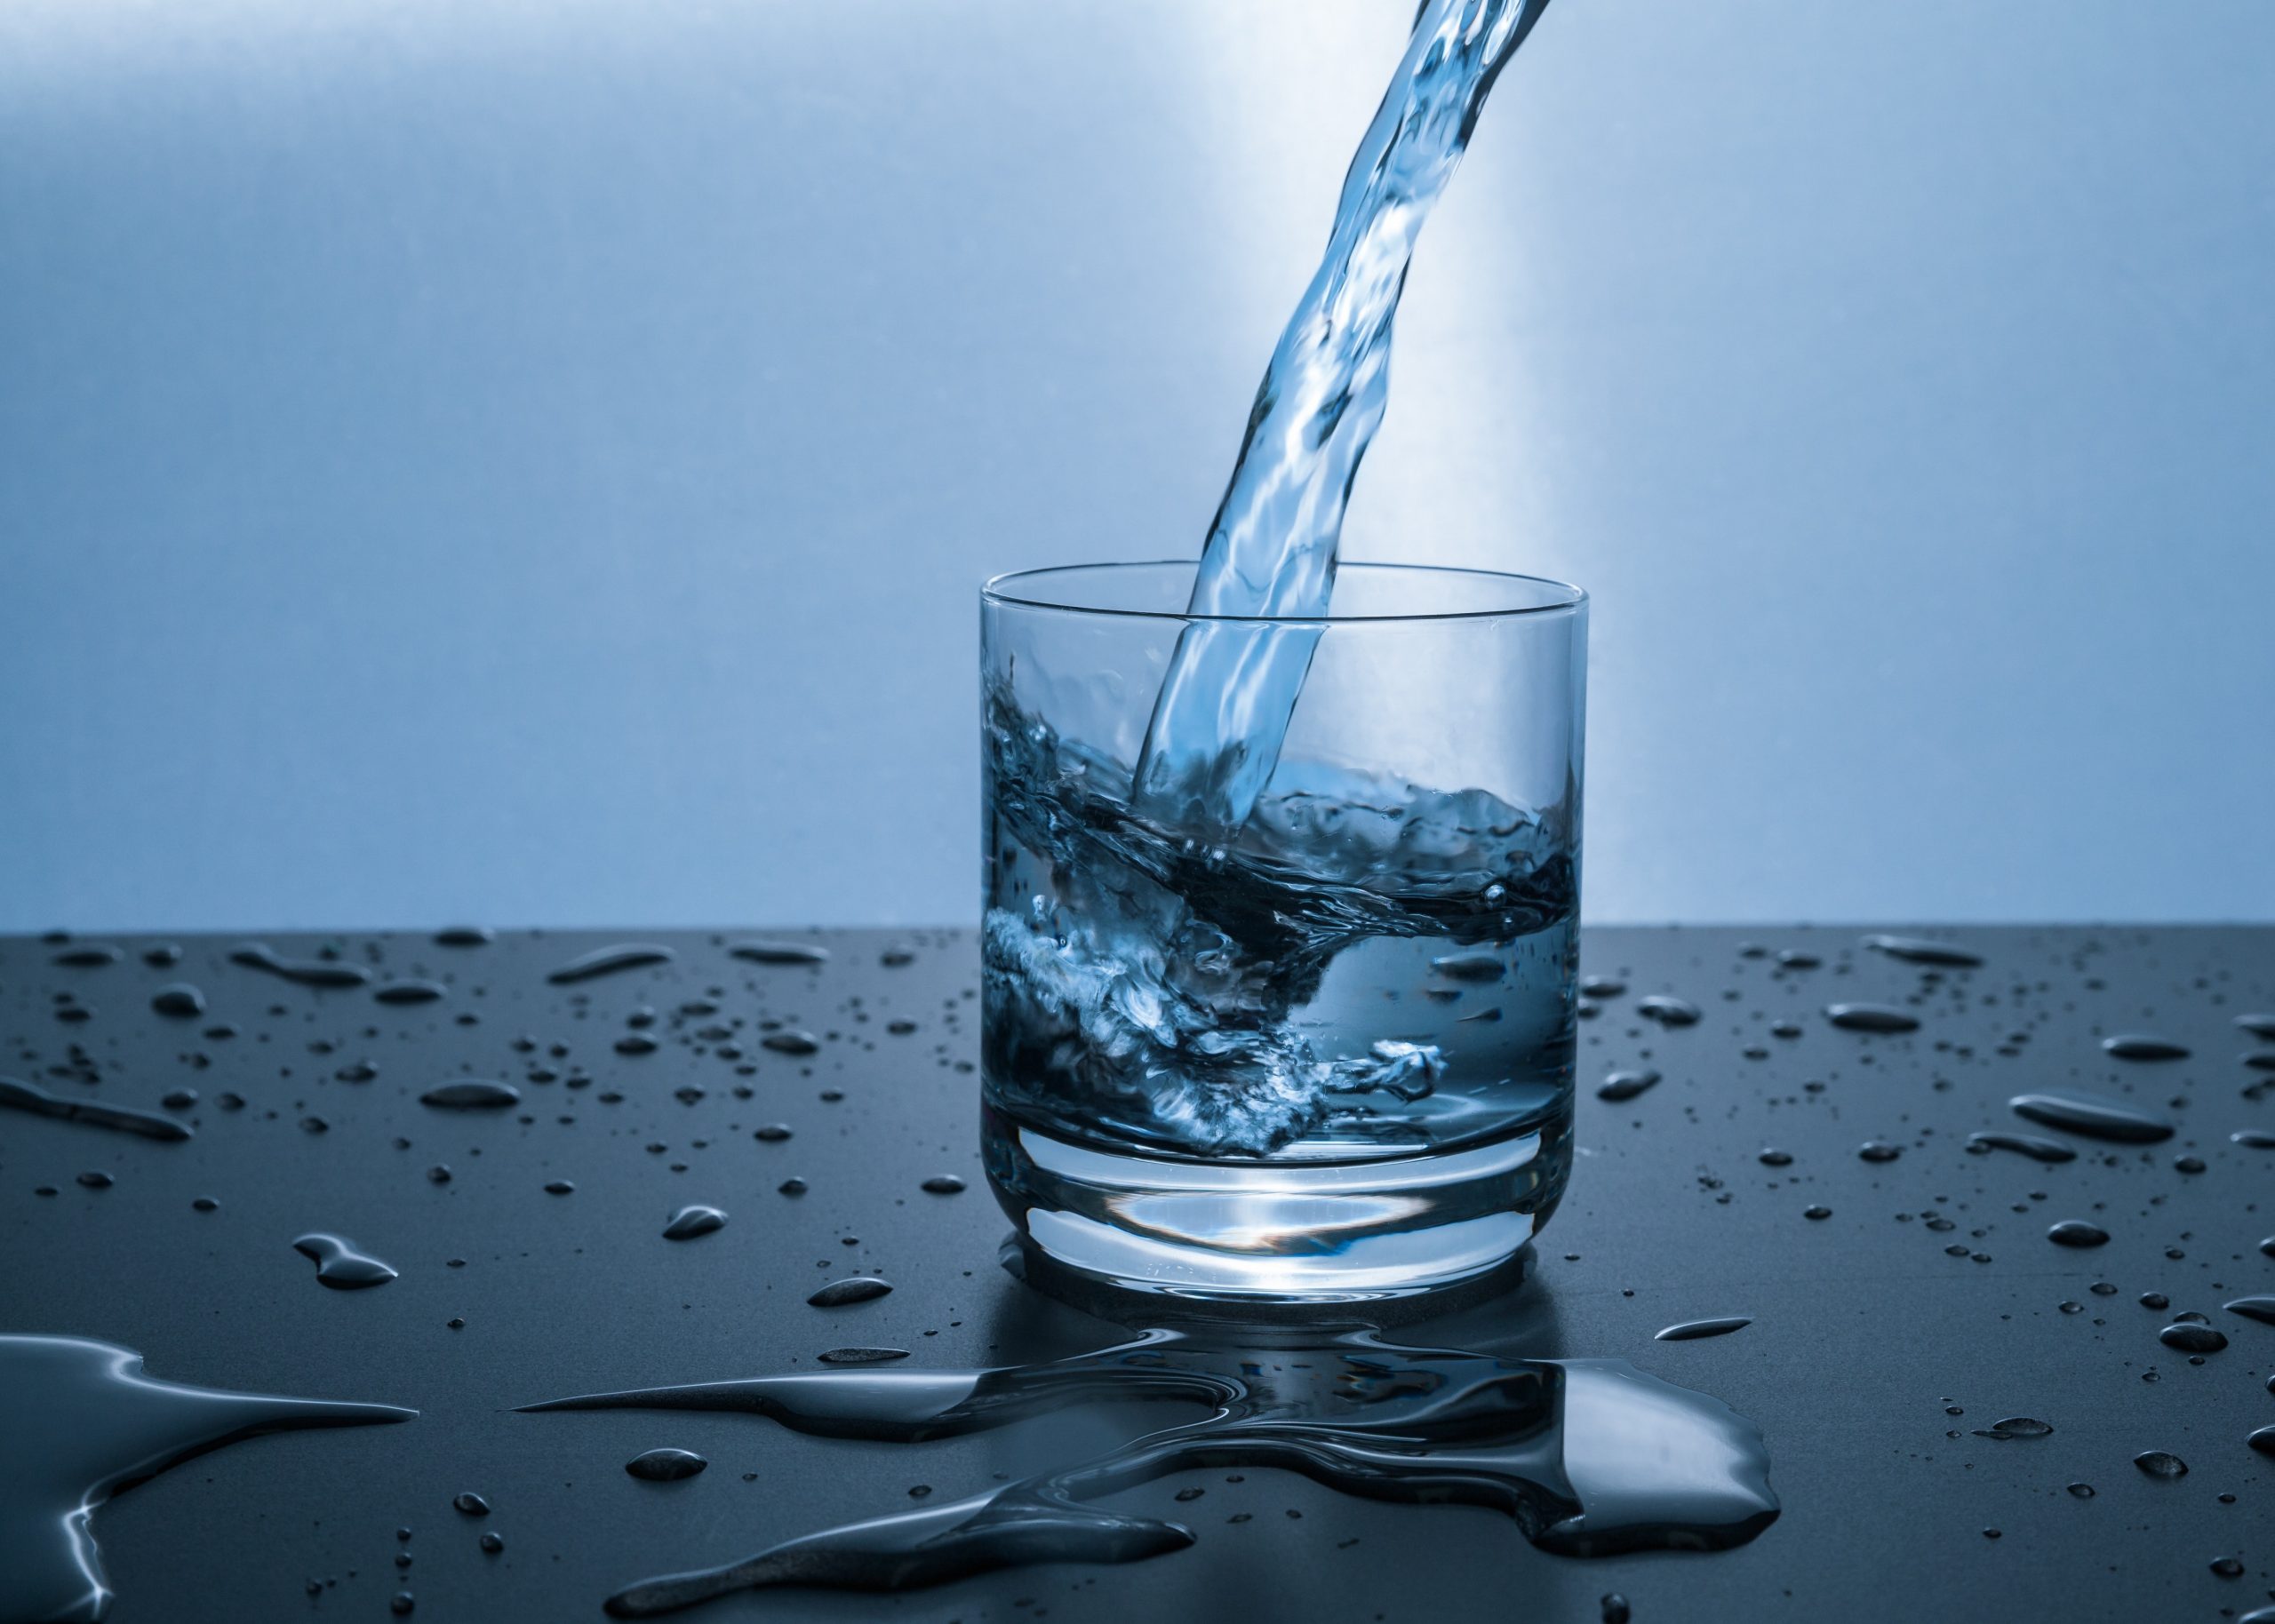 Ofwat Launches £2m Innovation in Water Challenge